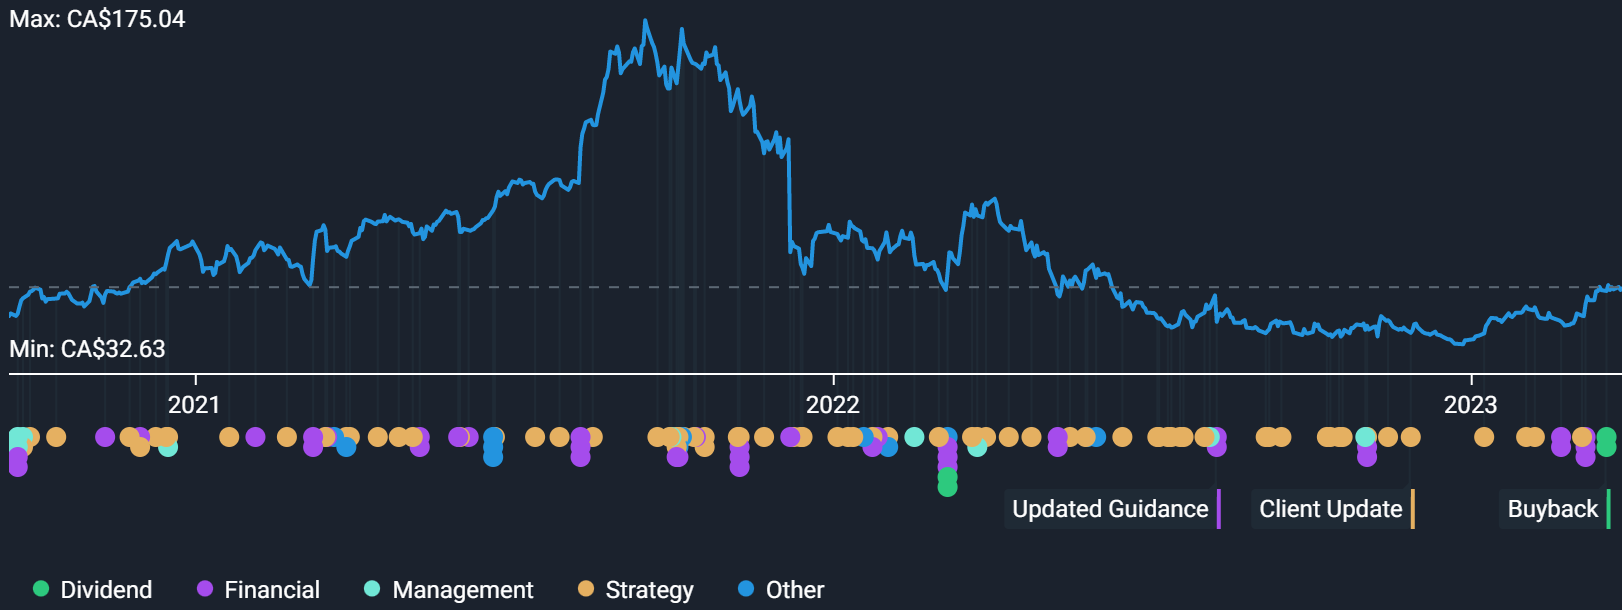 Nuvei 3-Year Price Chart | Simply Wall St.